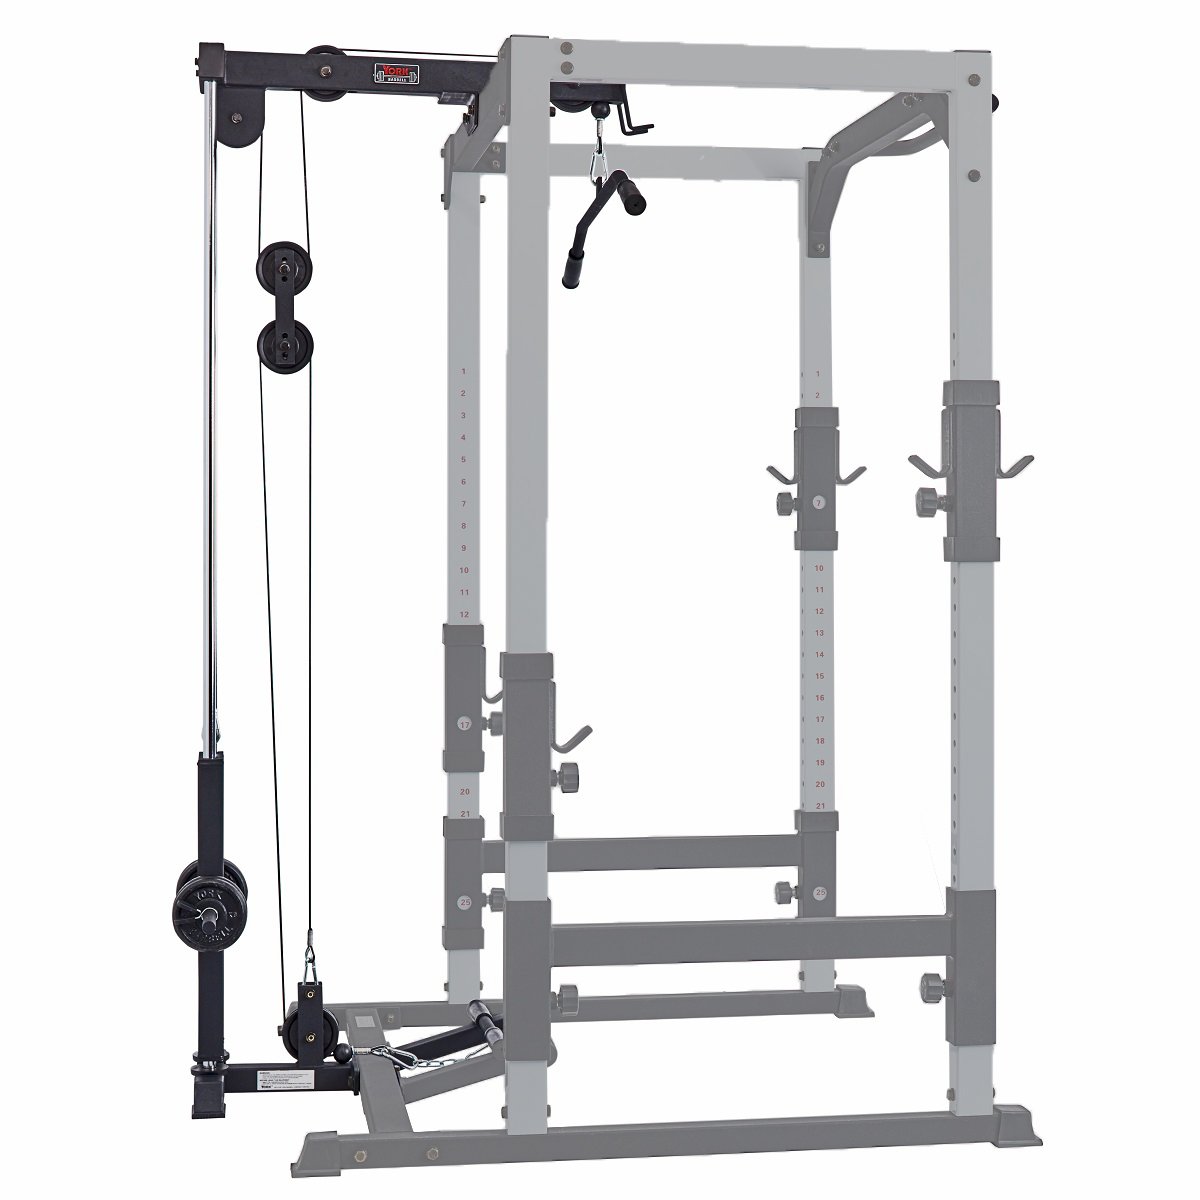 Loading Pin Dumbbell Rack weight rack home Pulley Cable Exercises Attachment 